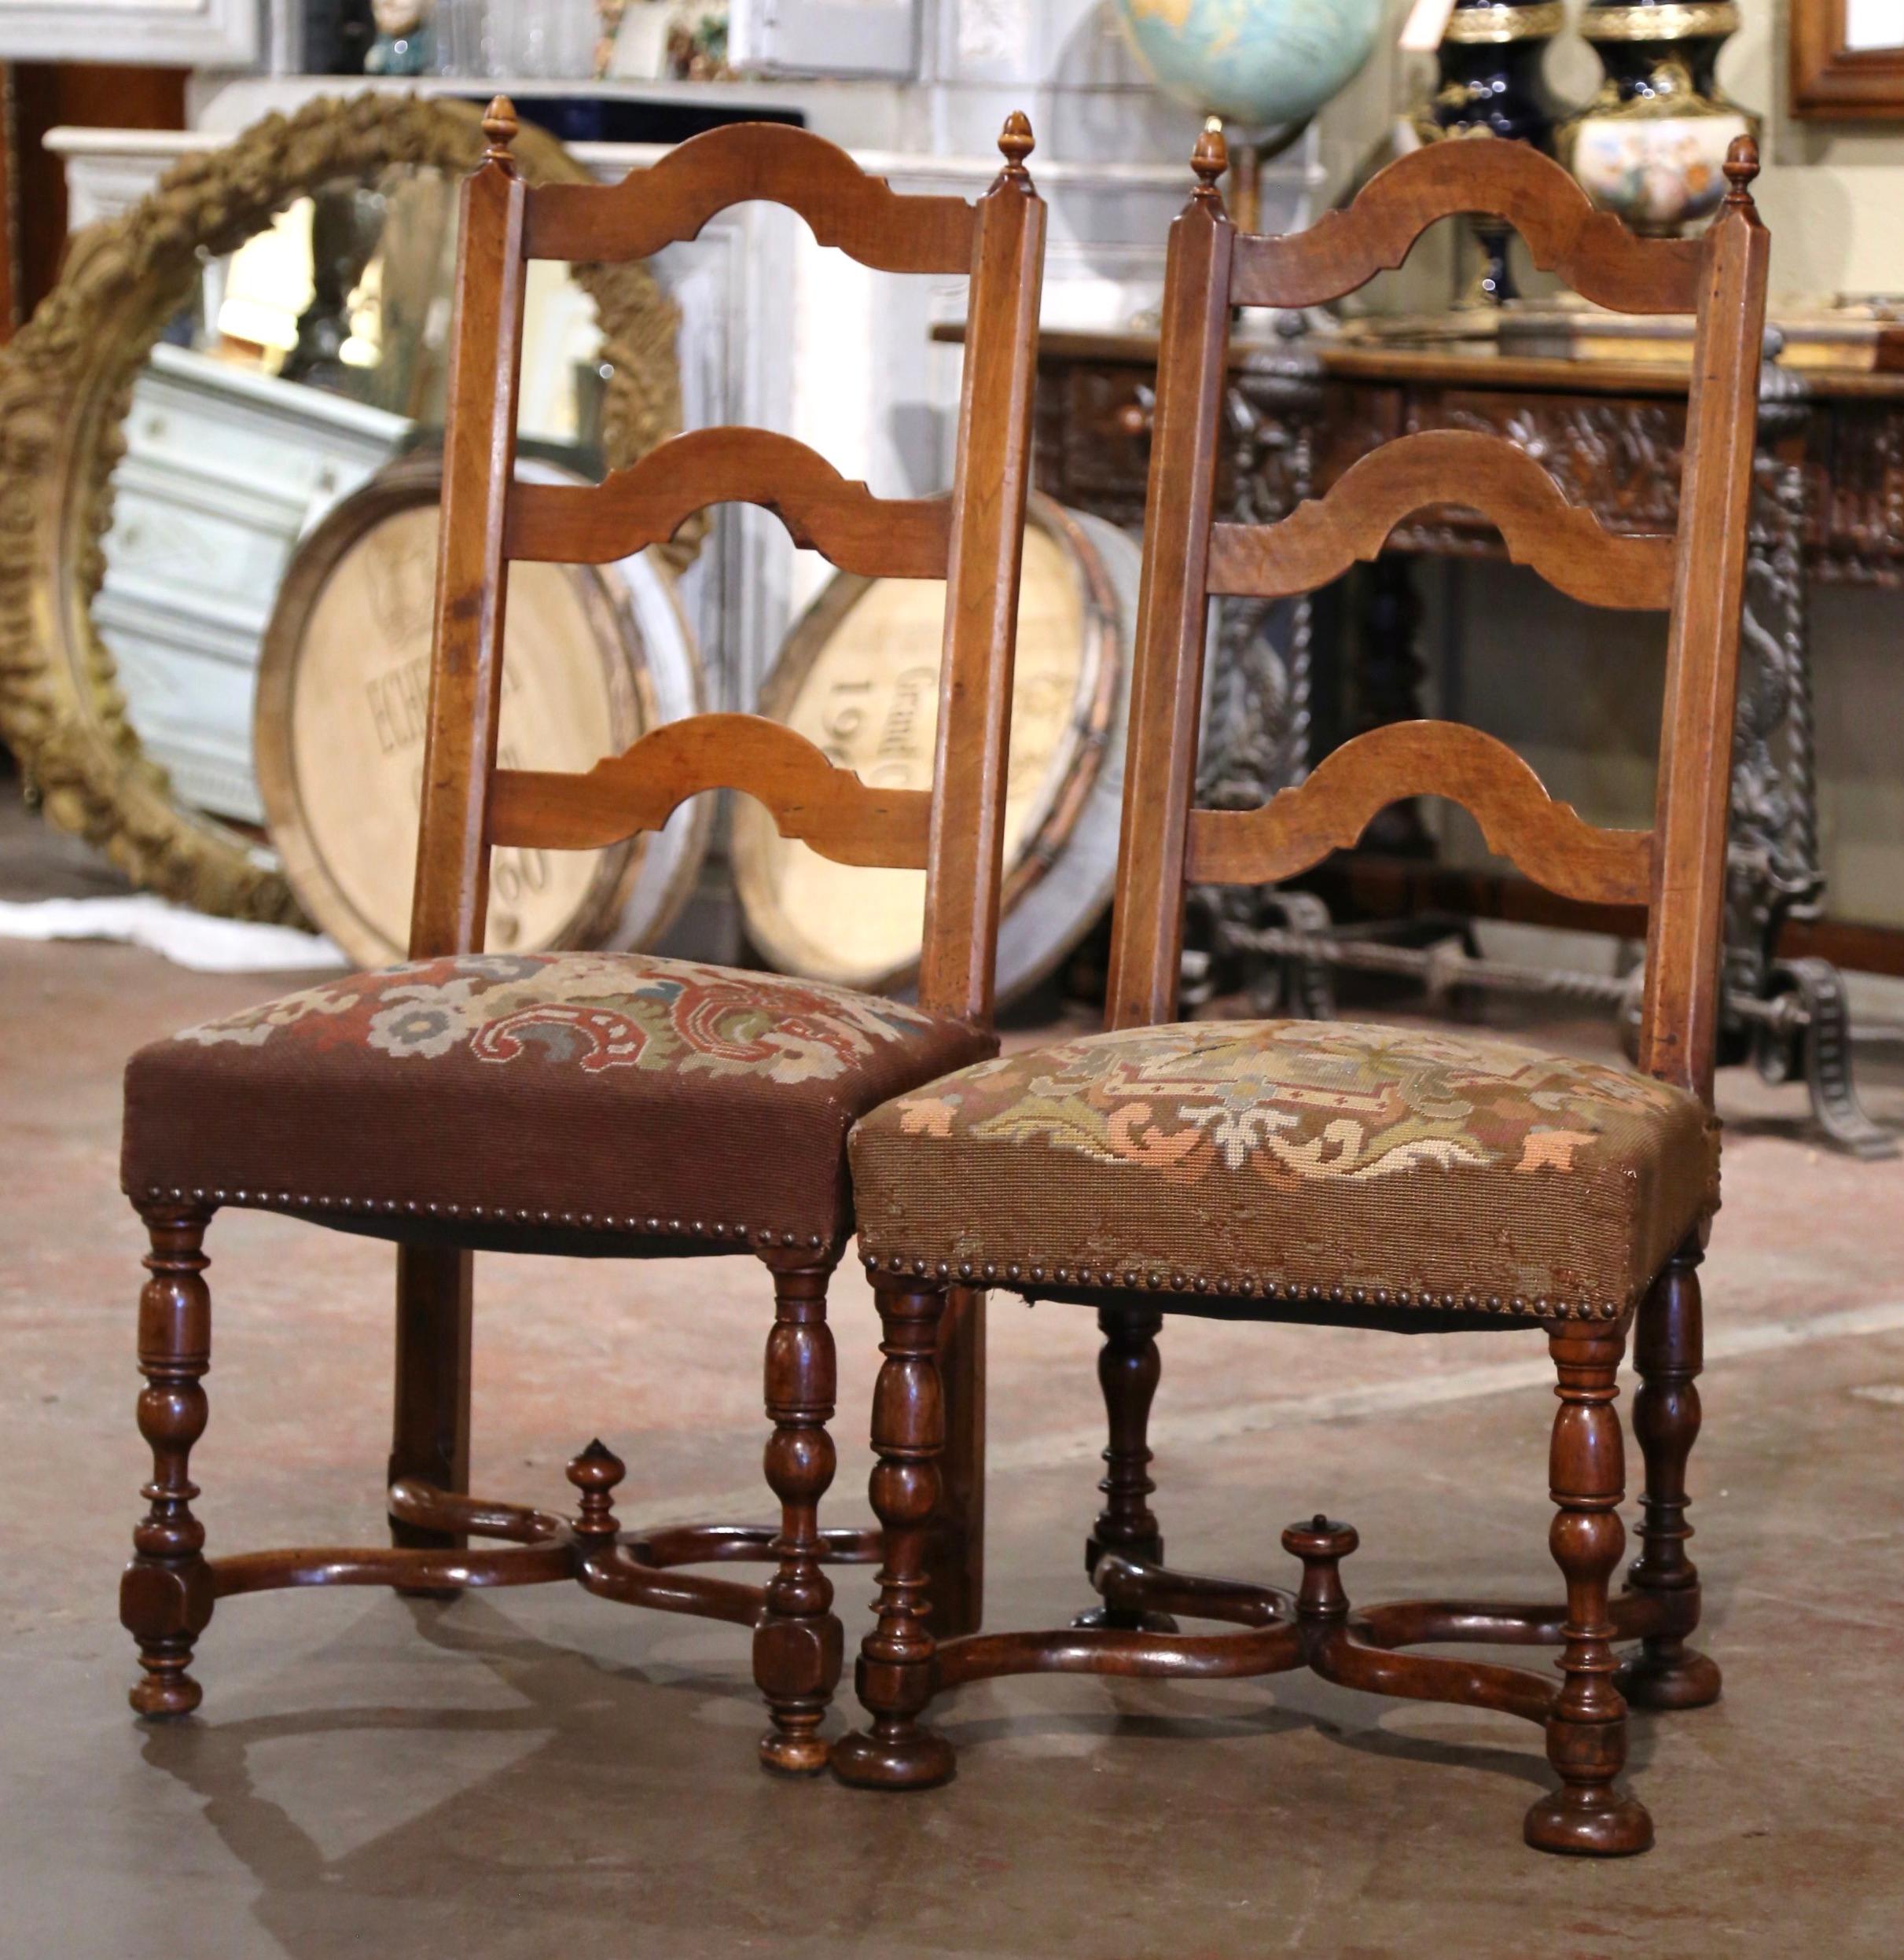 Decorate a bedroom or study with this elegant pair of antique side chairs. Crafted in southern France circa 1870, each chairs stands on turned legs ending with bun feet over a carved X stretcher embellished with a center finial. The tall and pitched